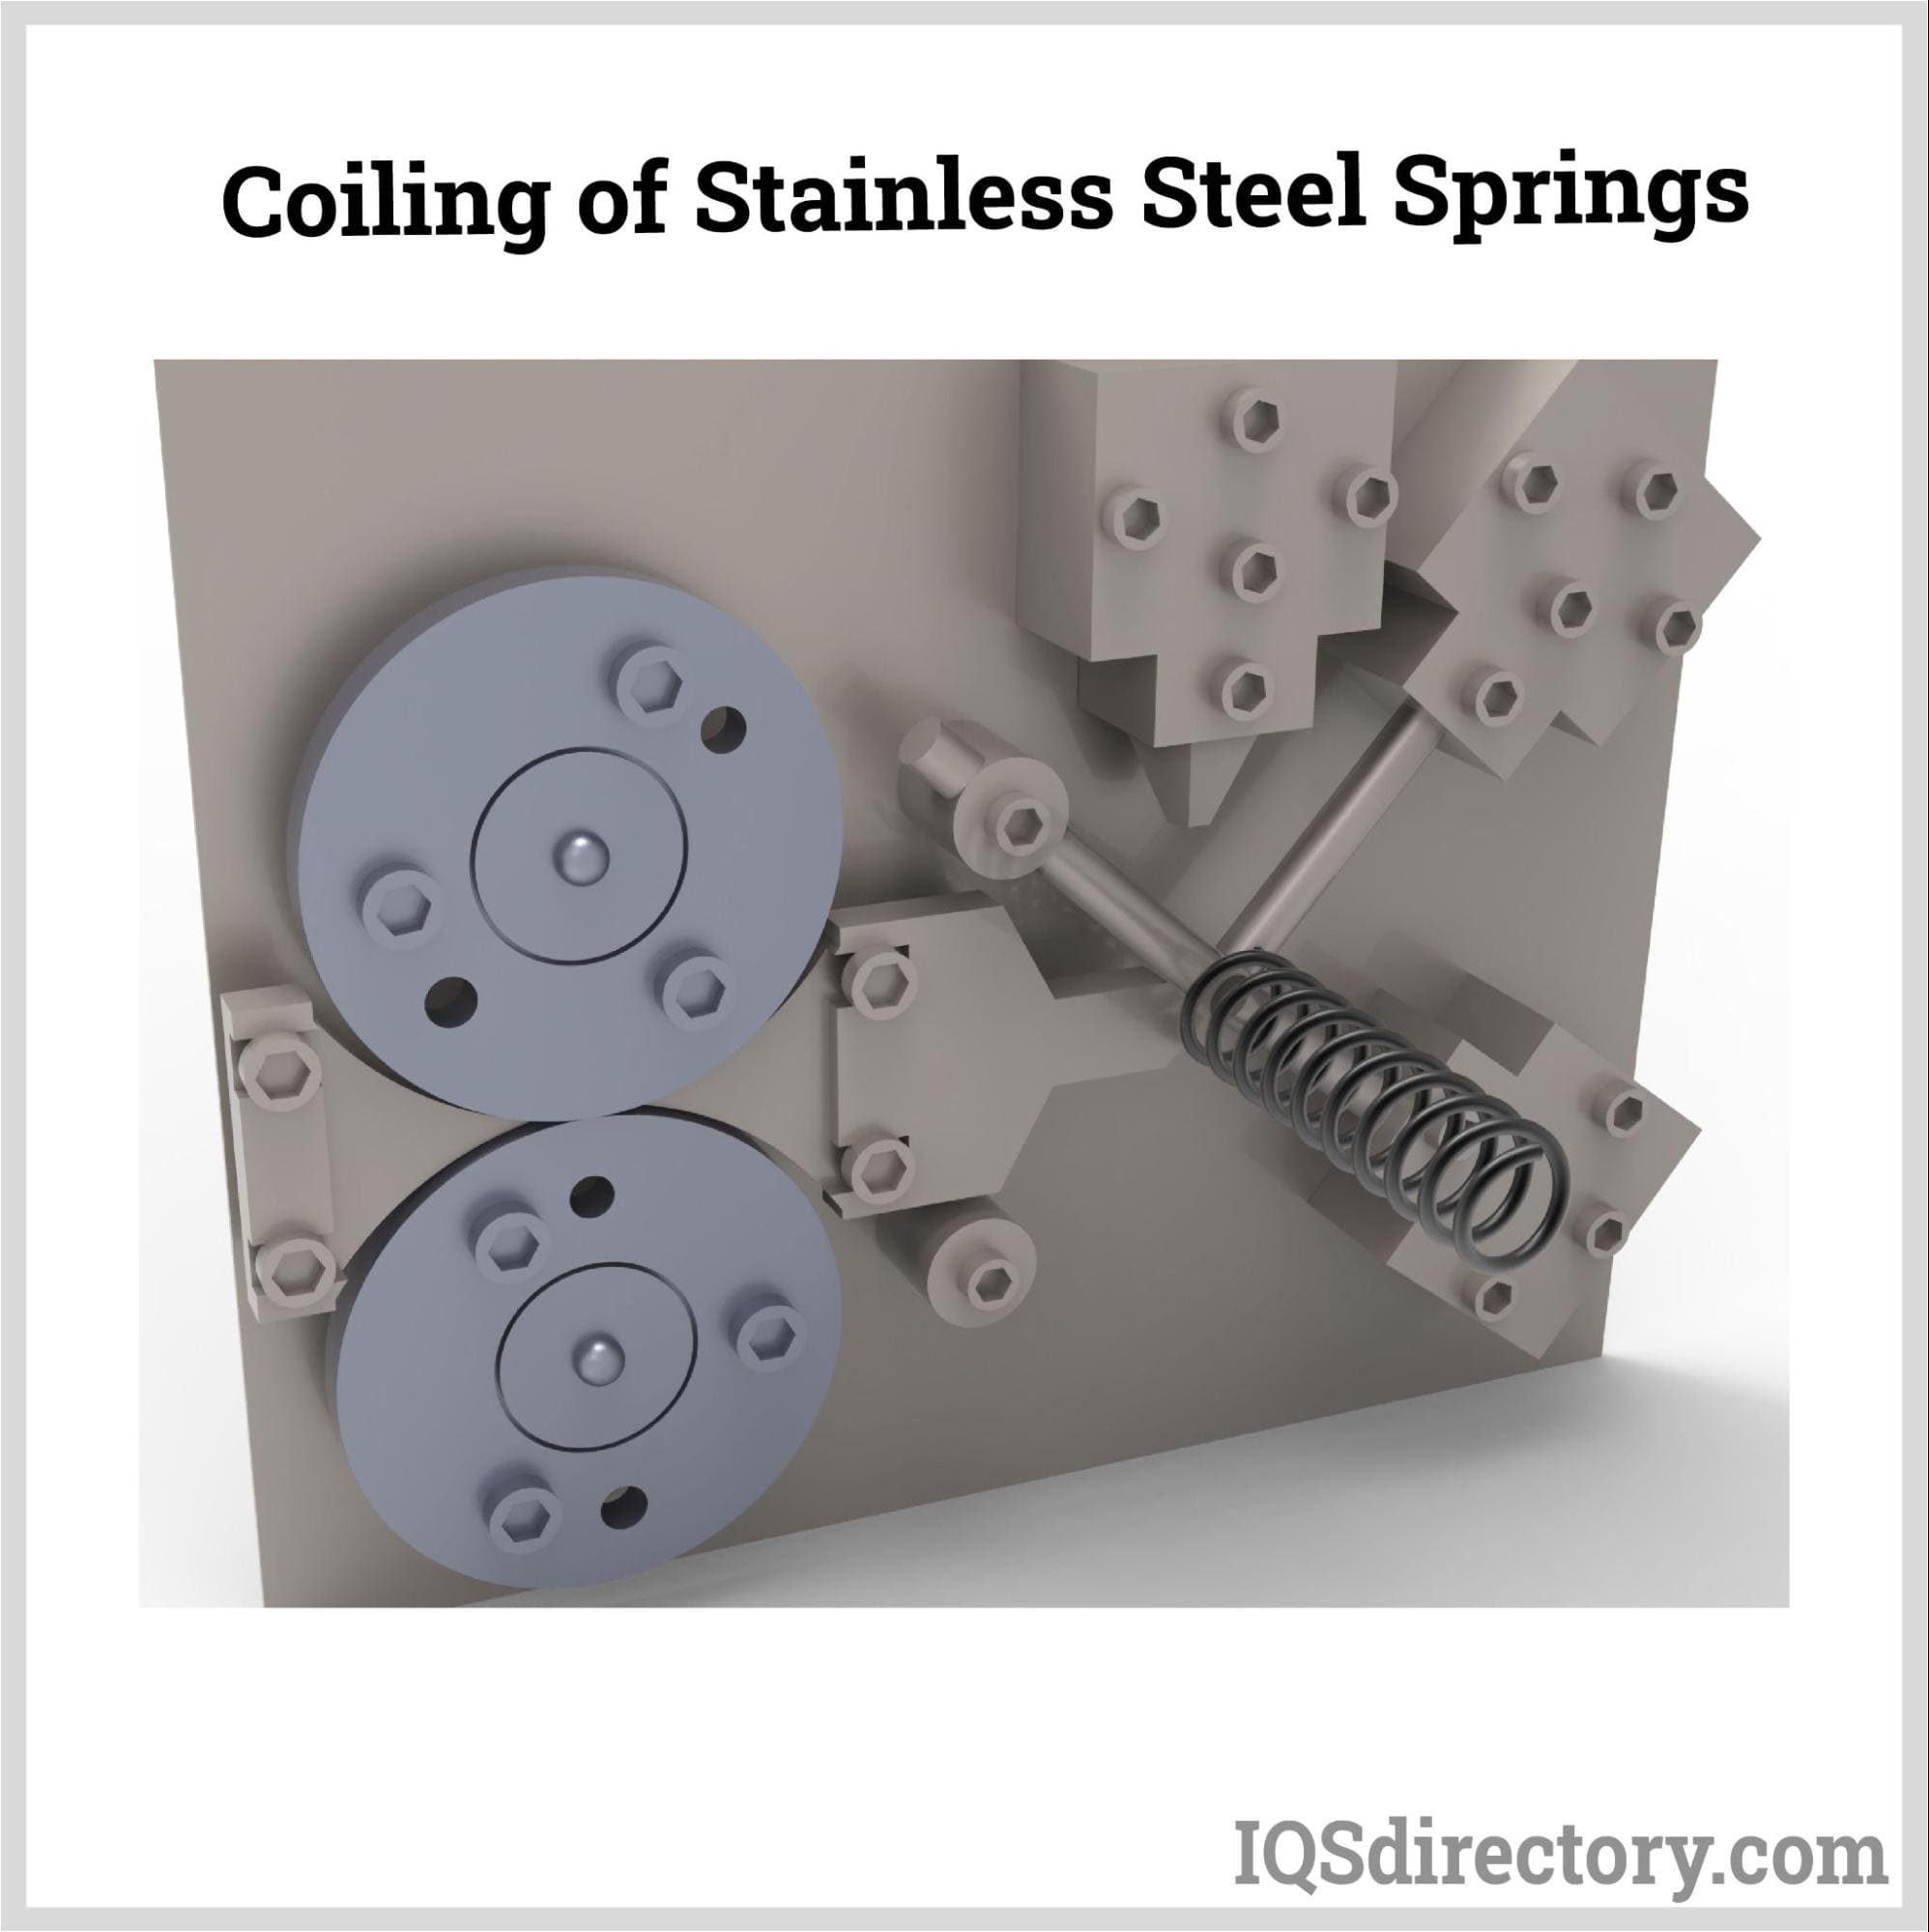 Coiling of Stainless Steel Springs